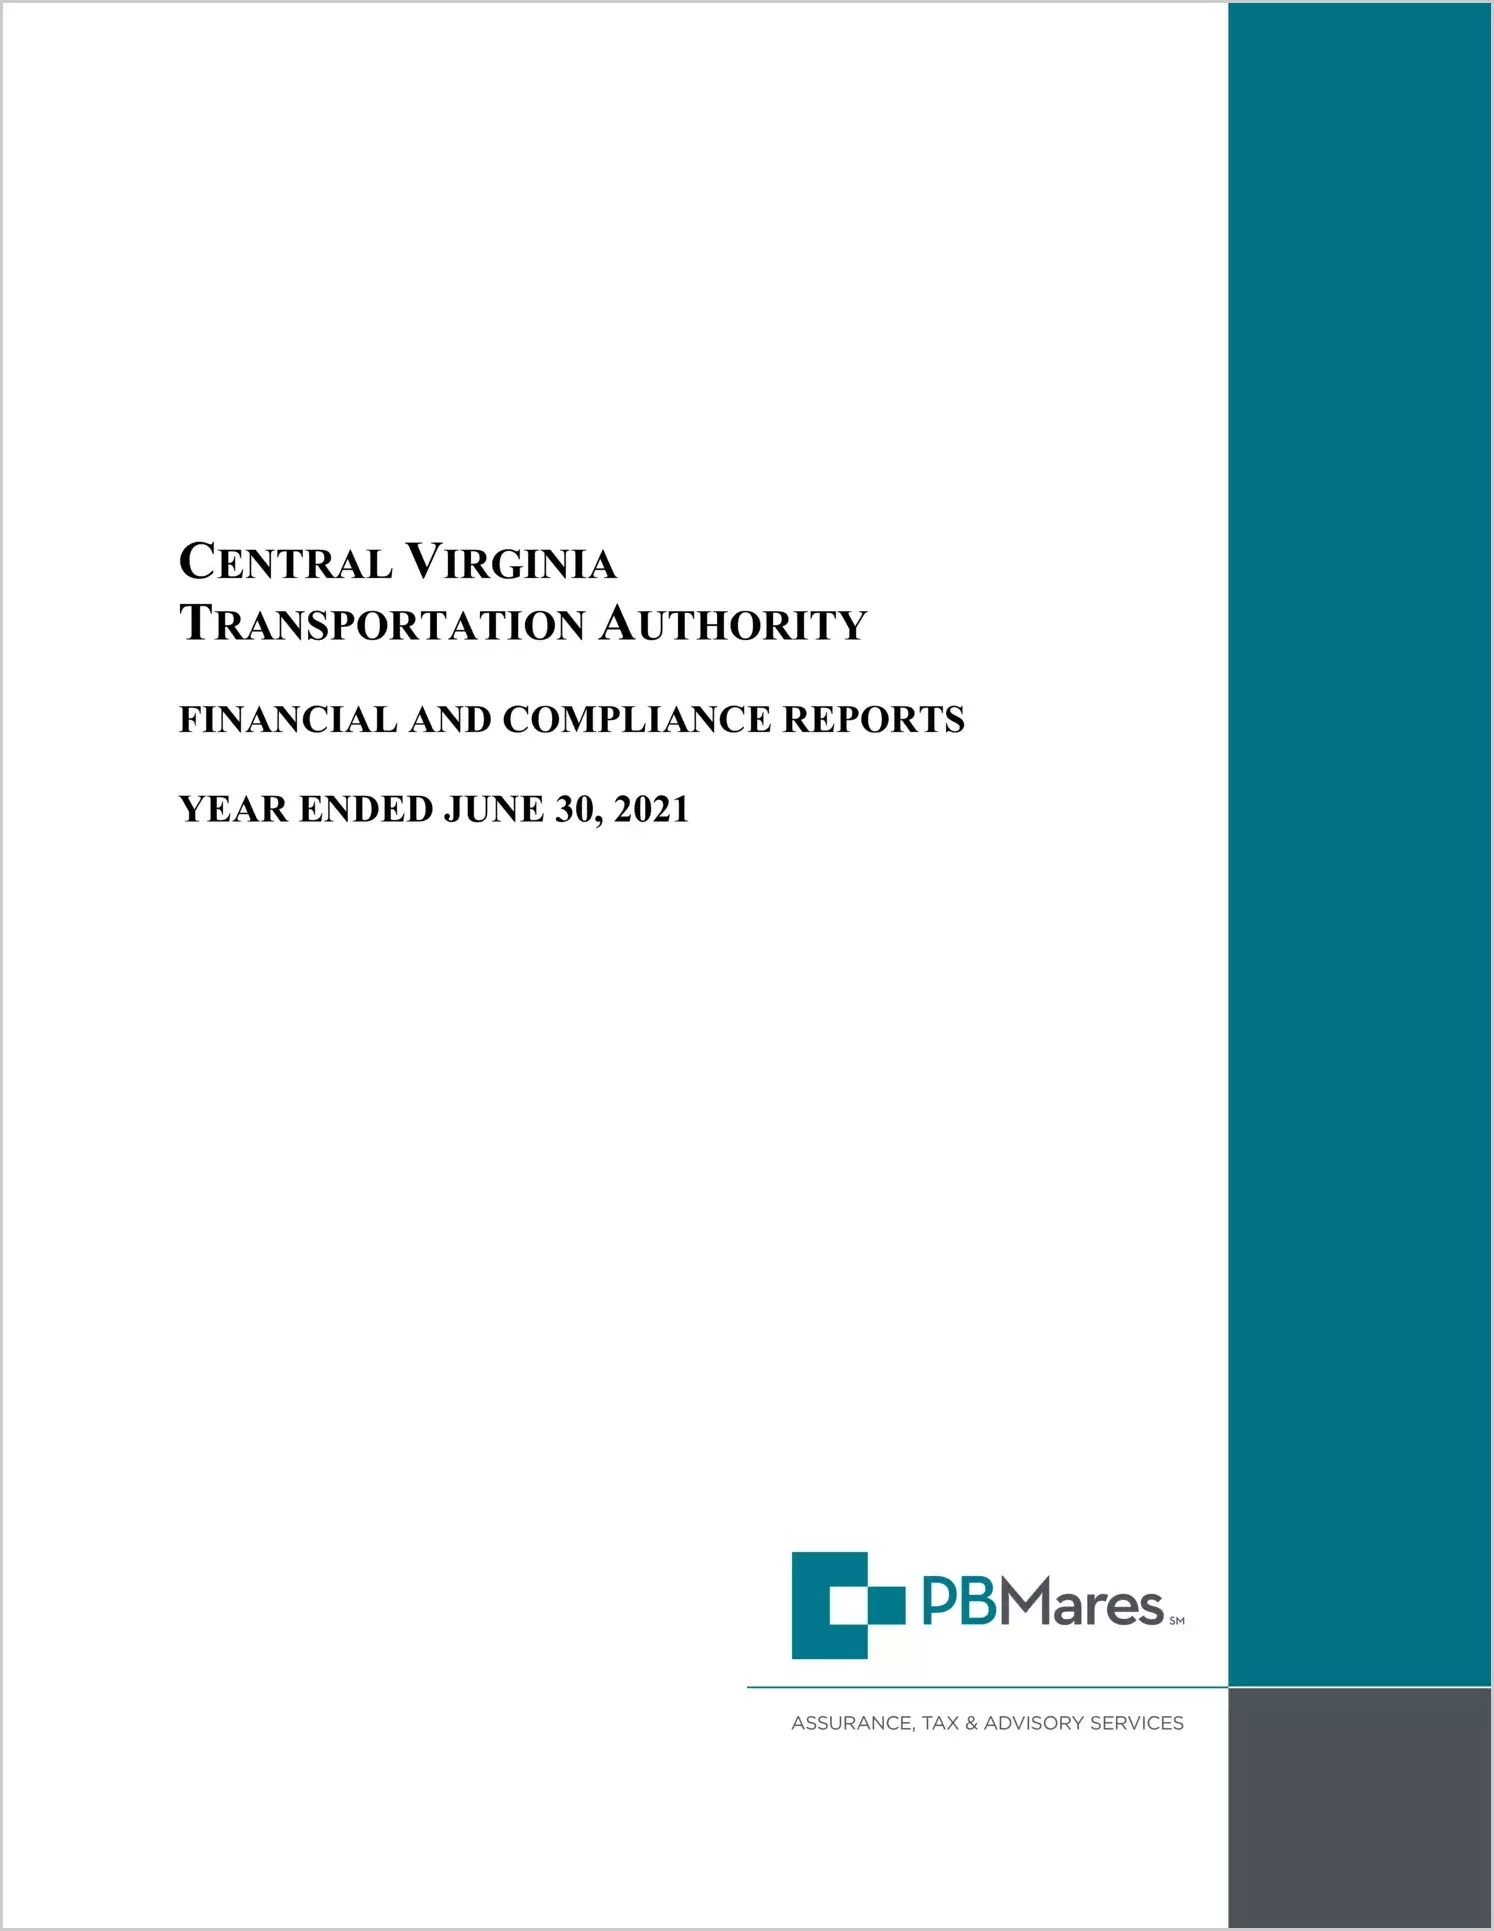 Central Virginia Transportation Authority for the year ended June 30, 2021